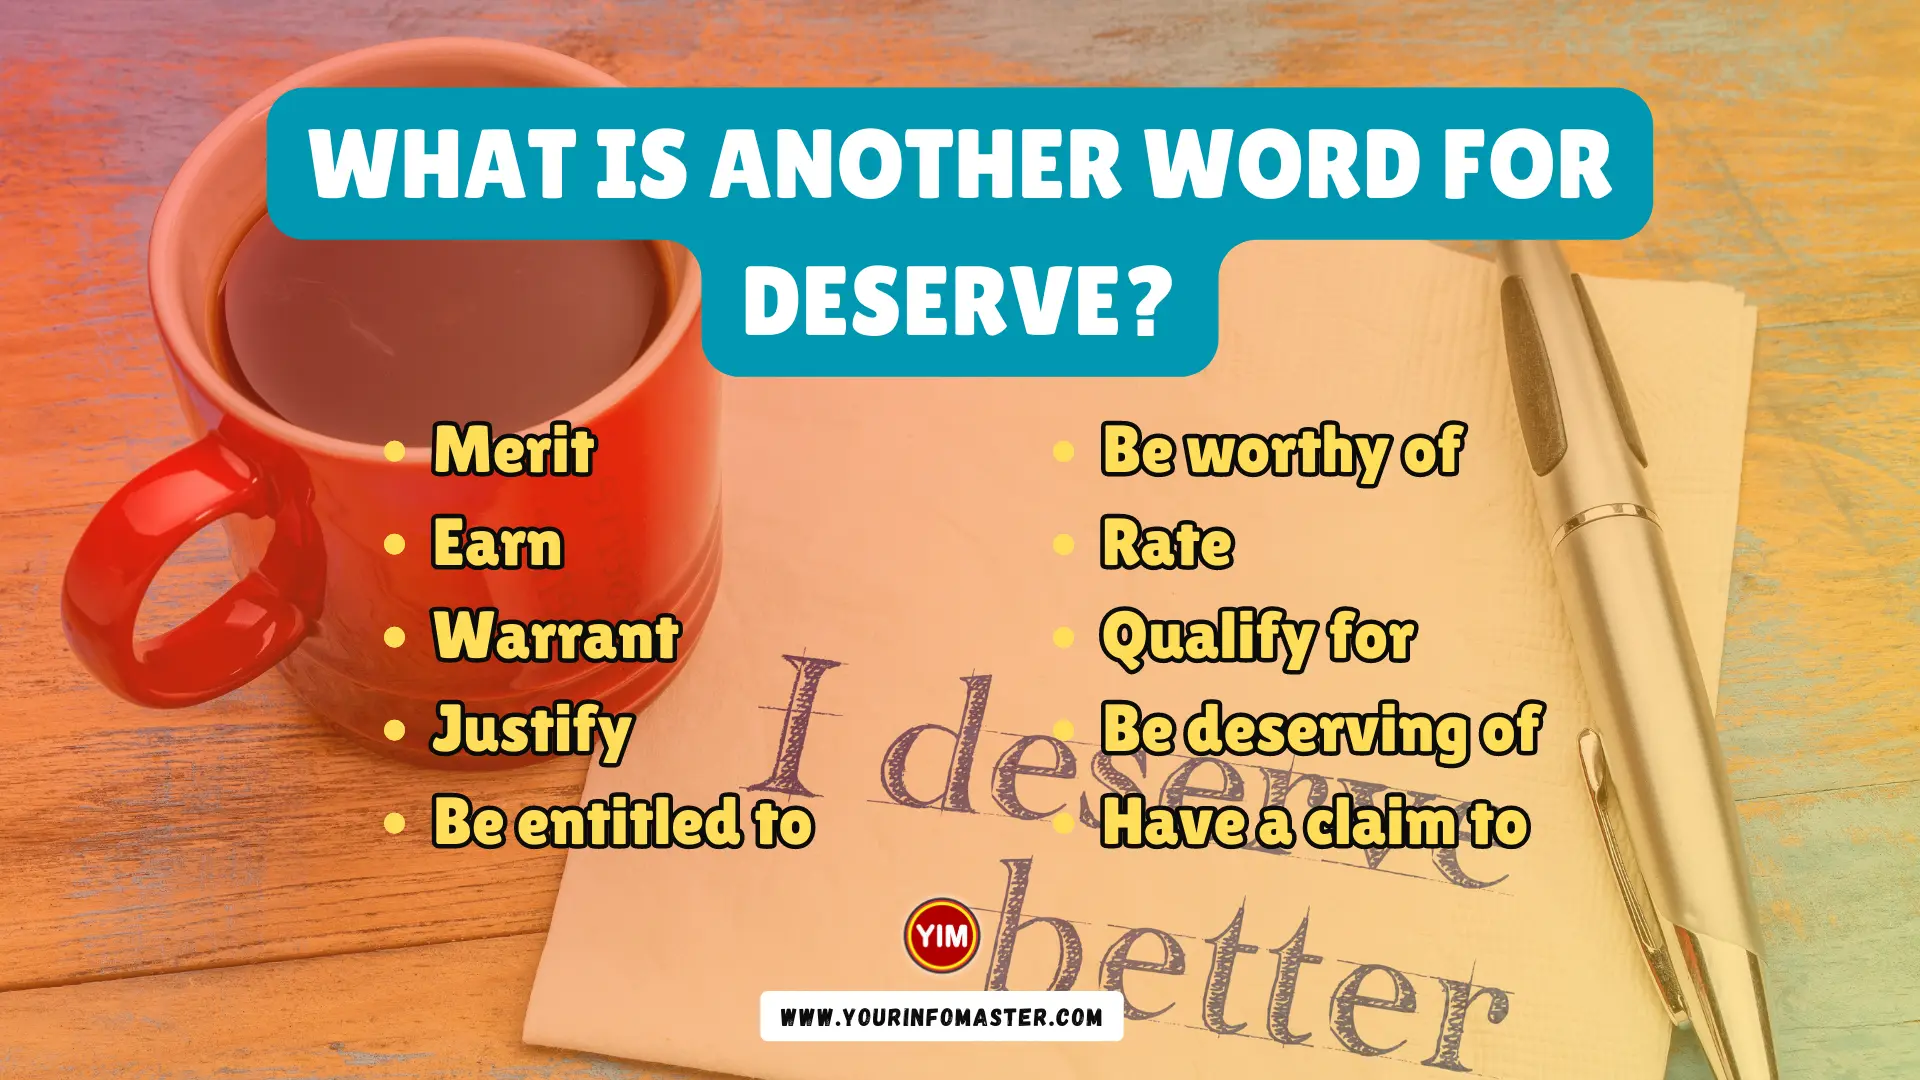 What is another word for Deserve